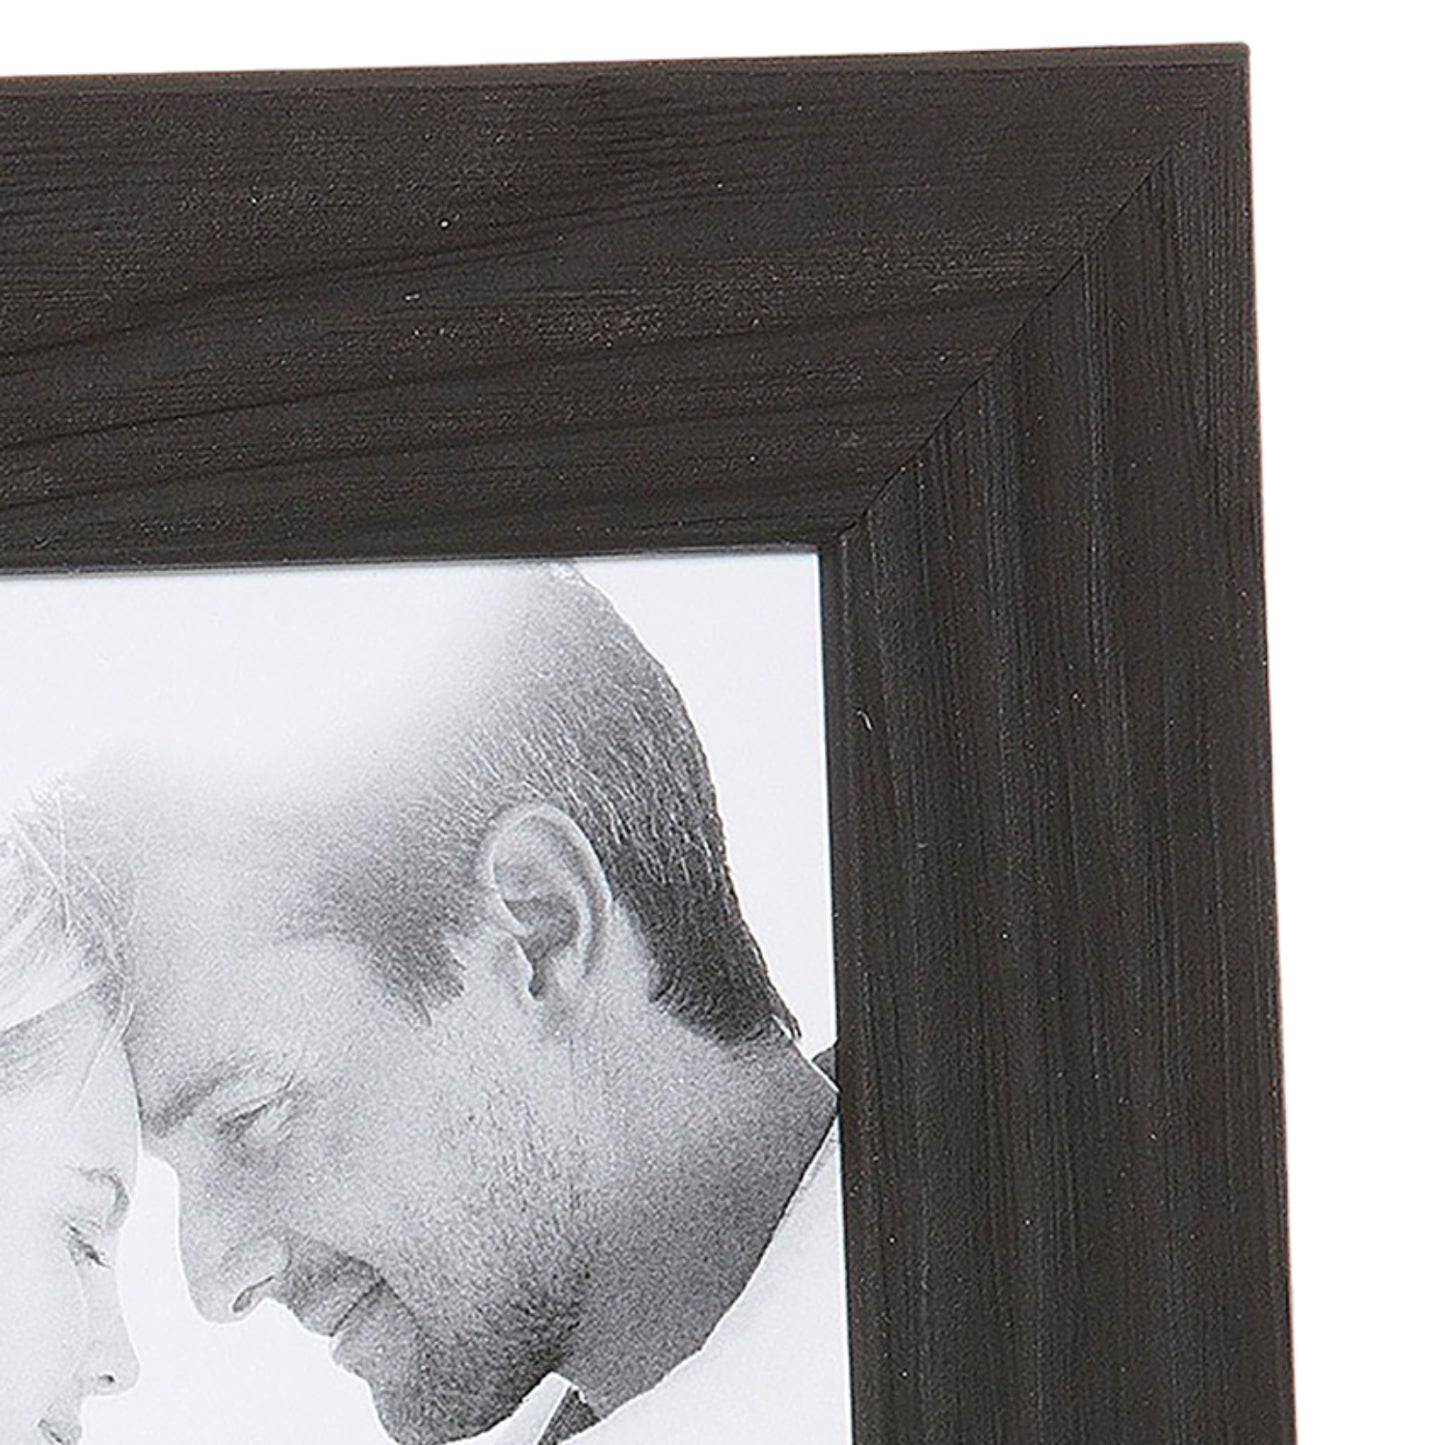 Black Charcoal 1-1/2" Arber Wood Picture Frame